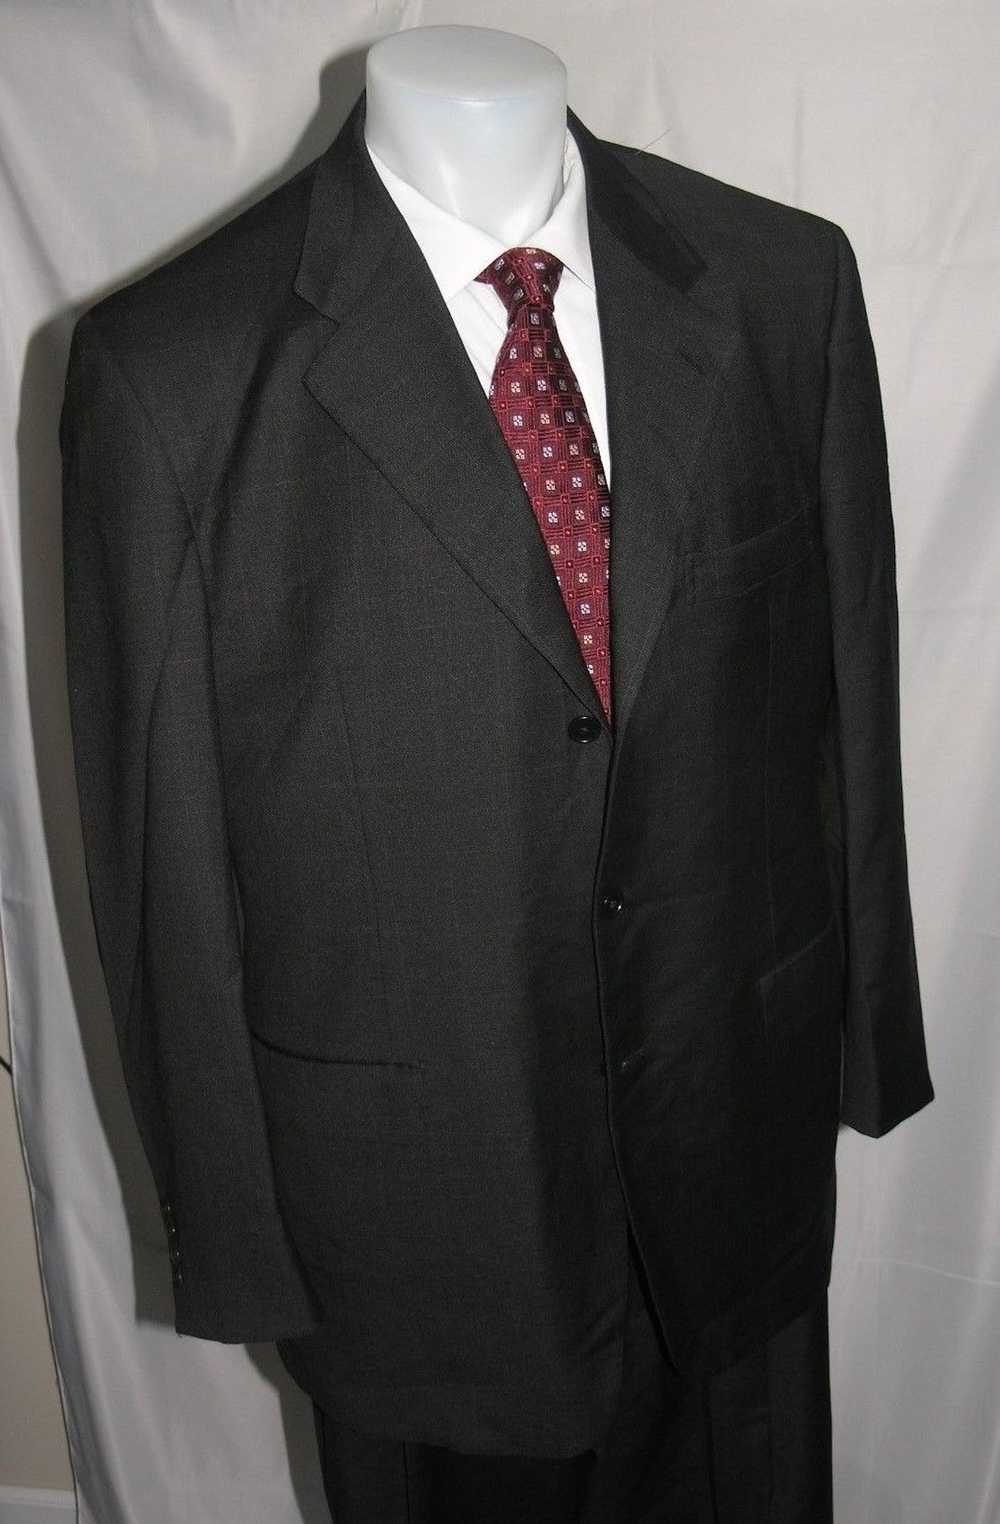 Davenza Roma Hand Tailored Three Button Suit 46L - image 7